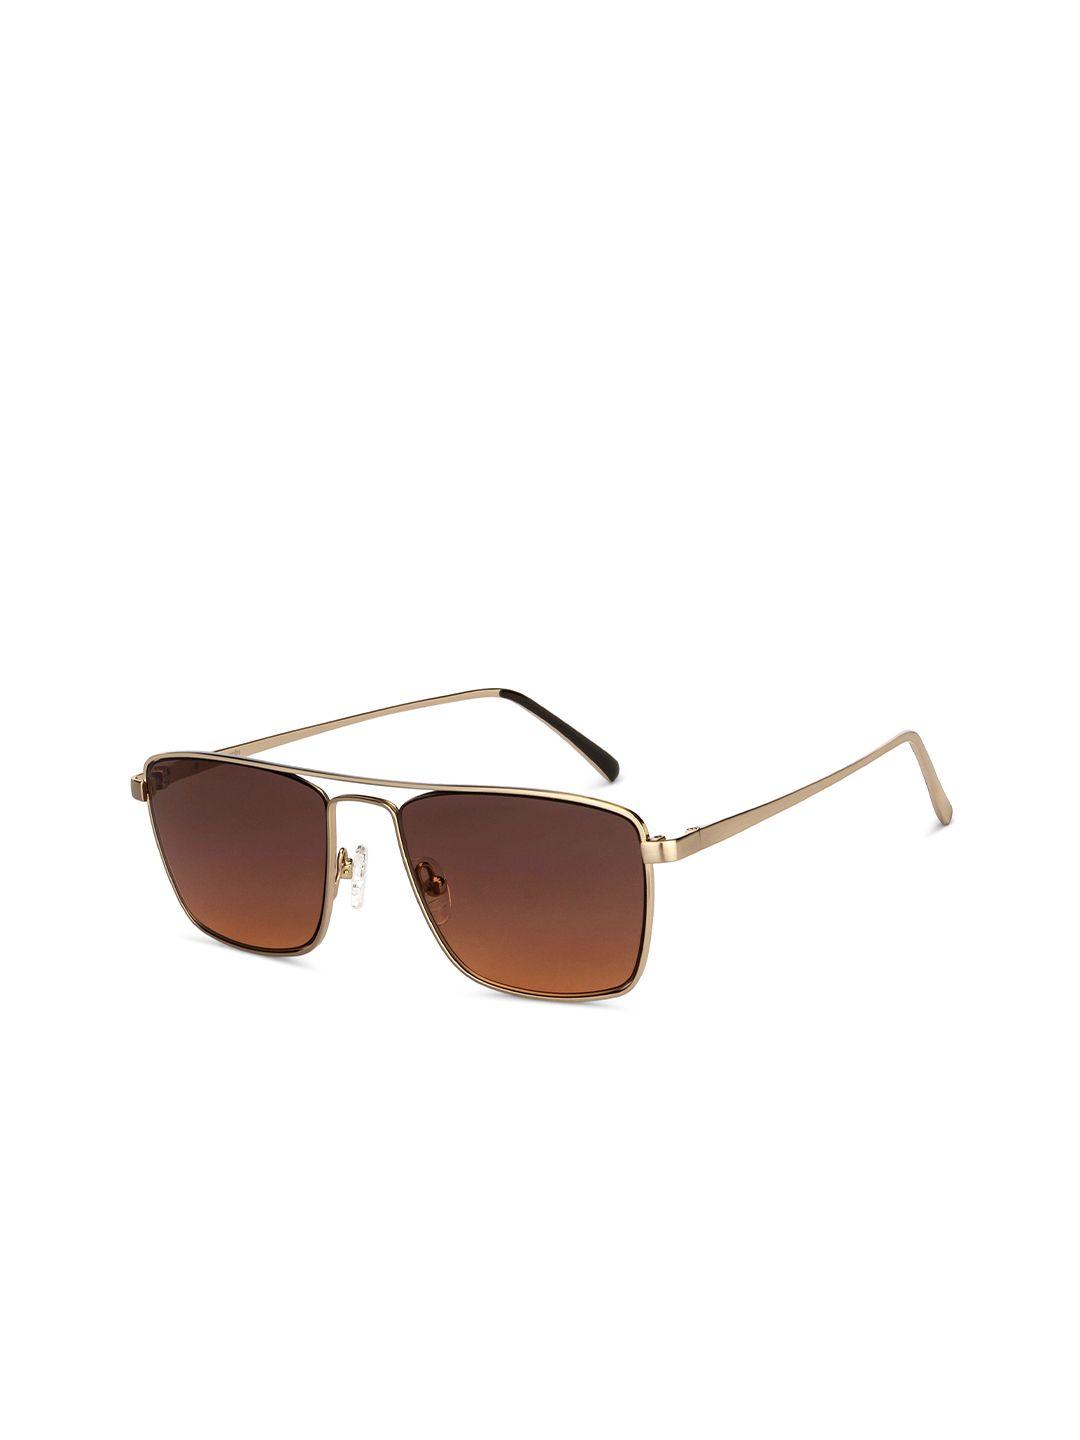 john jacobs unisex brown lens & gold-toned square sunglasses with uv protected lens